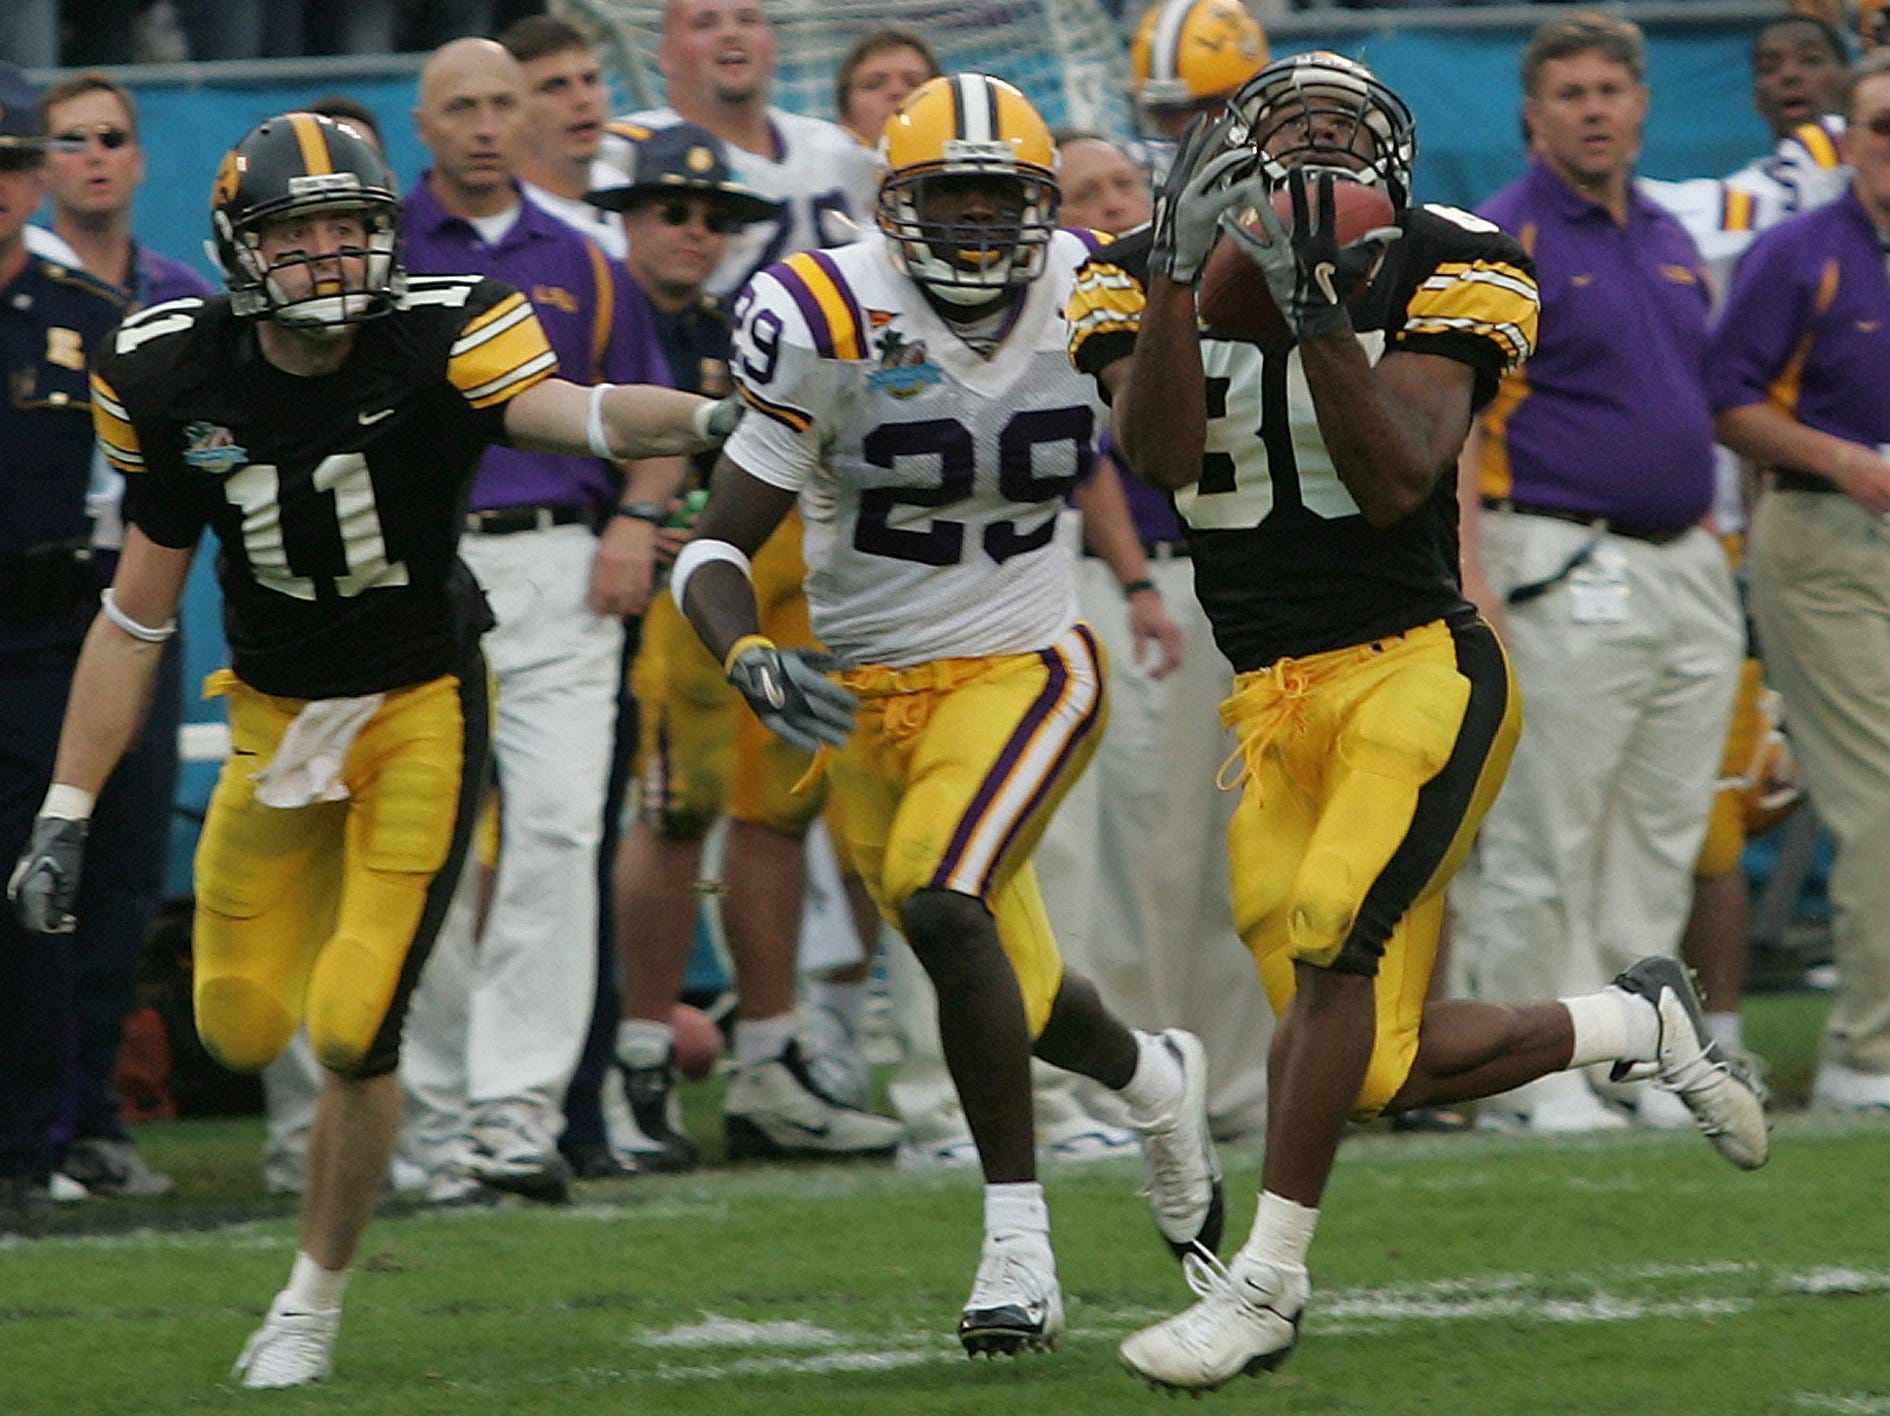 Jan. 1, 2005: Iowa receiver Warren Holloway makes the game-winning touchdown catch in the final seconds of the Capital One Bowl to defeat LSU 30-25.